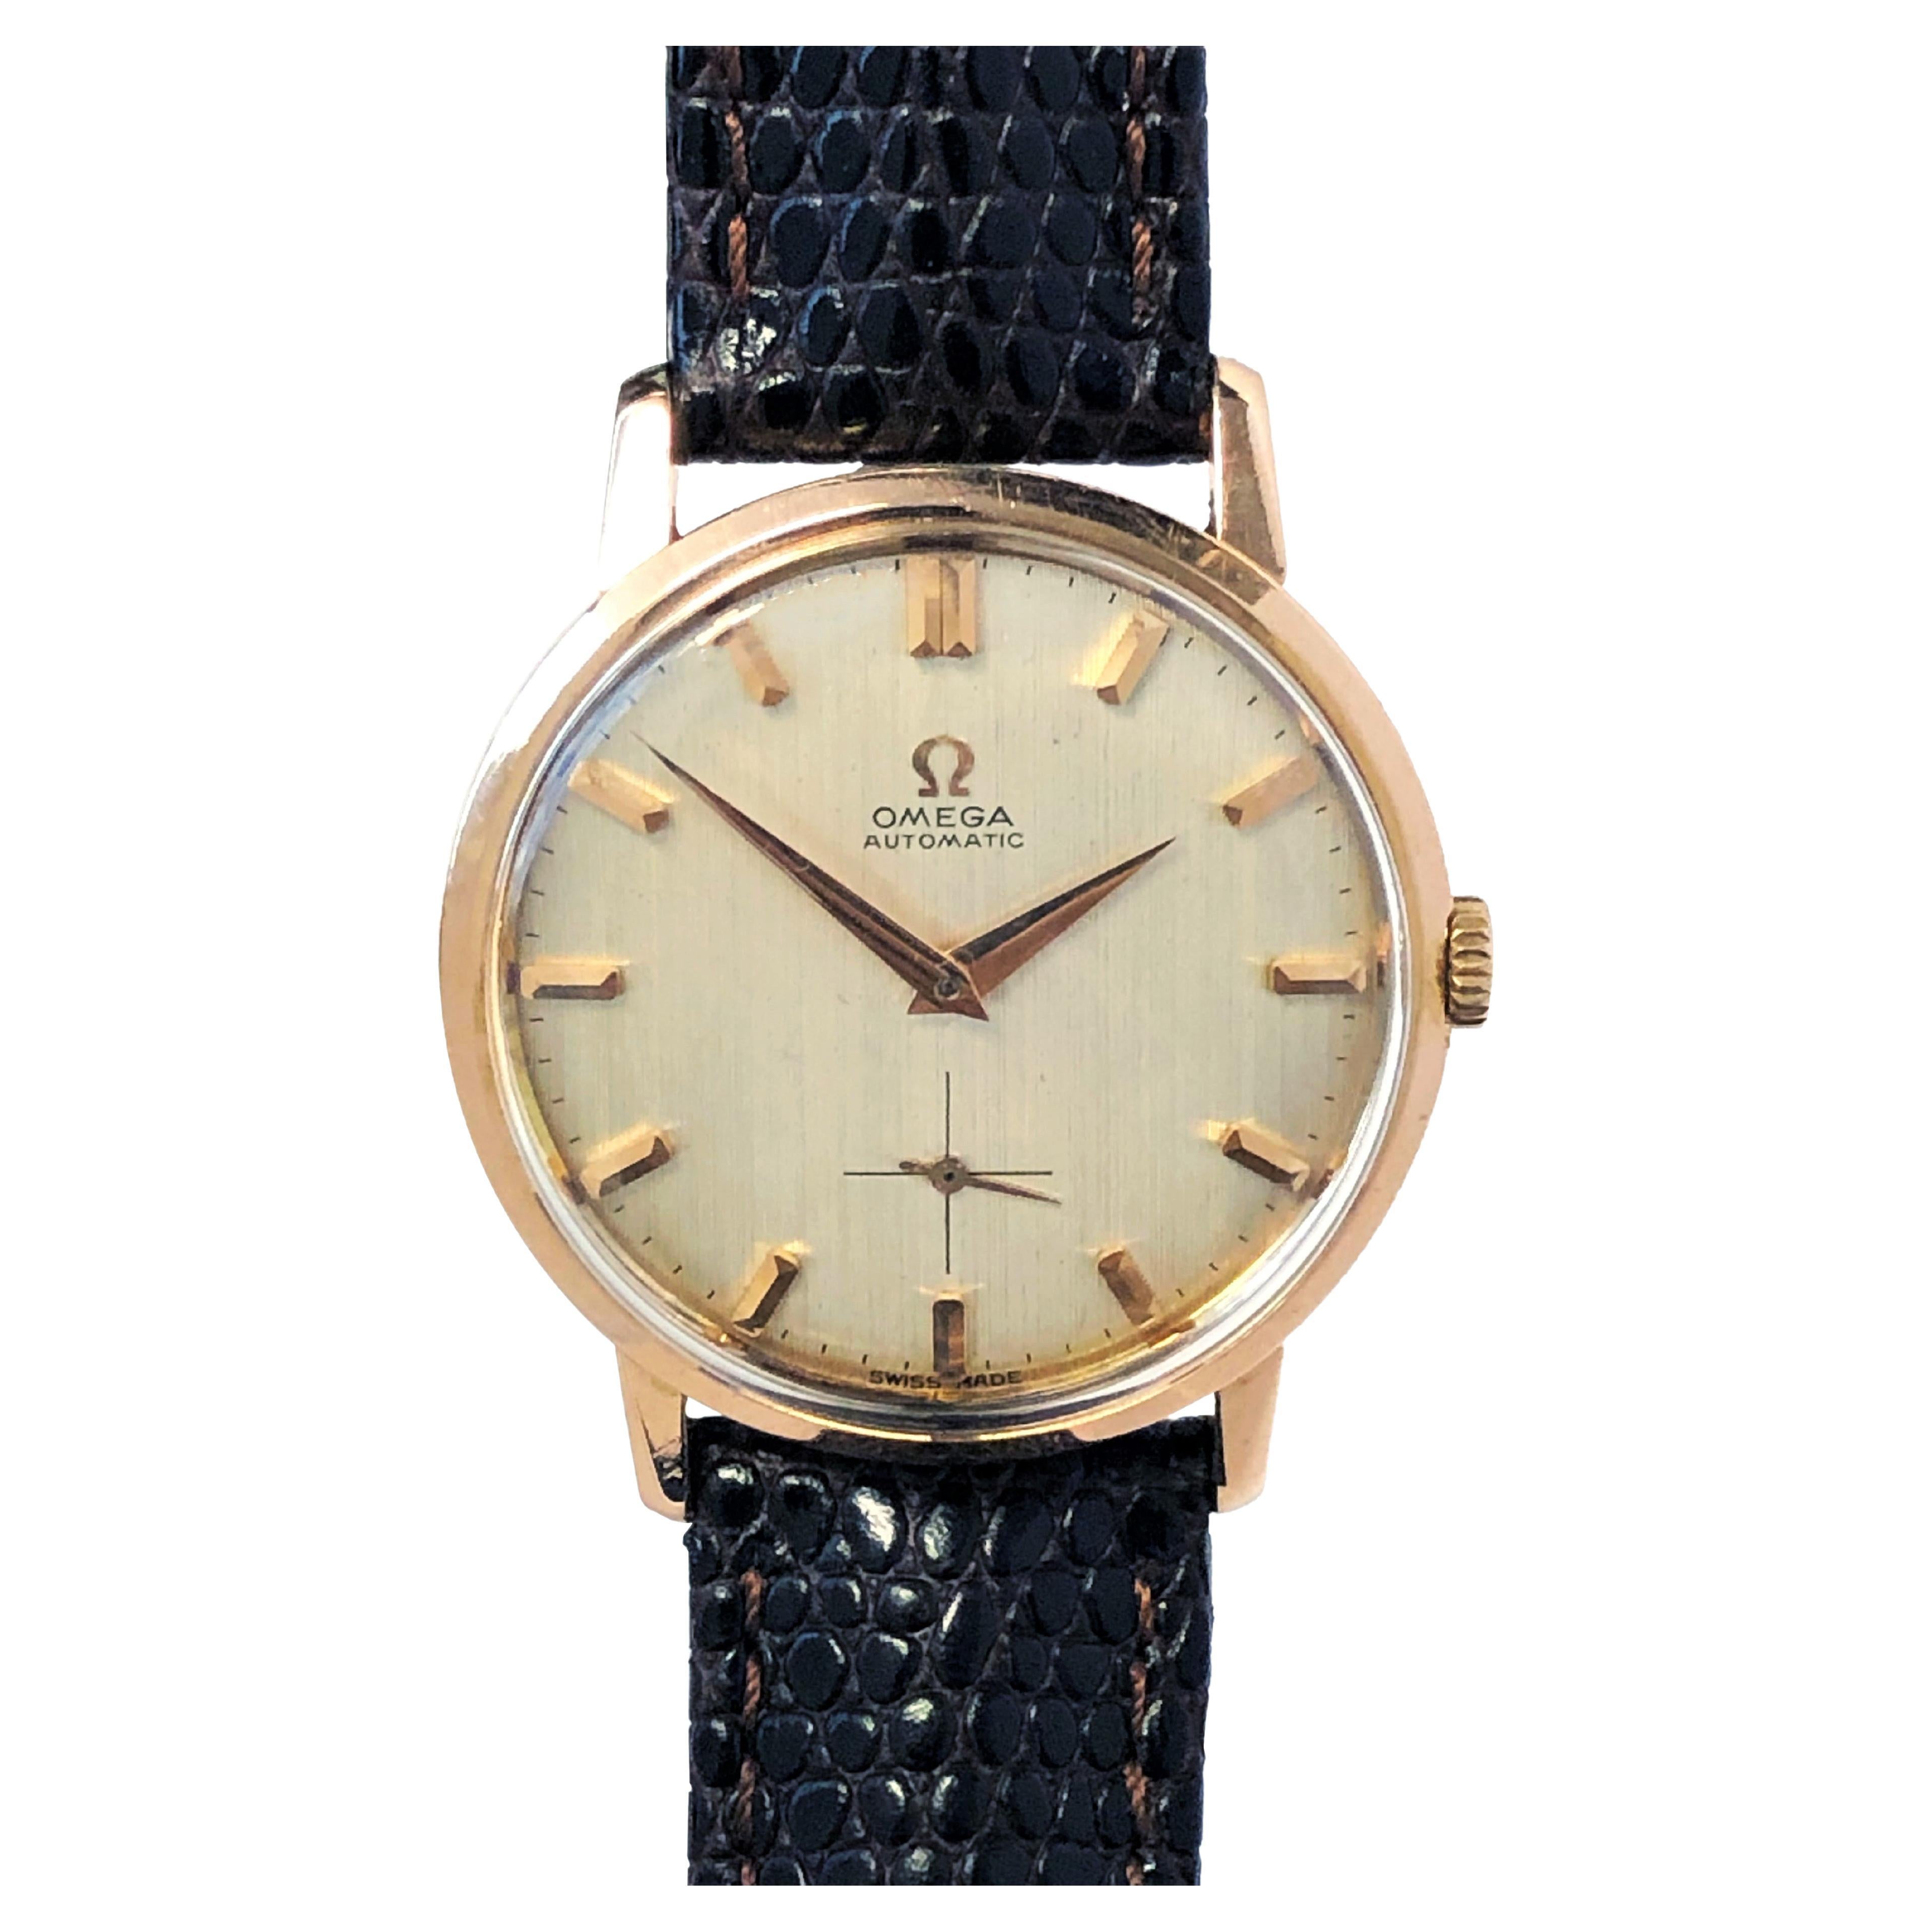 Circa 1950 Omega Wrist Watch, 34 M.M. 18k Rose Gold 3 piece case with scrolled down lugs. original and Mint condition Gold Satin Linen Dial with raised Rose Gold markers. Caliber 491, 19 jewel Automatic, Self winding movement.  New Brown Lizard